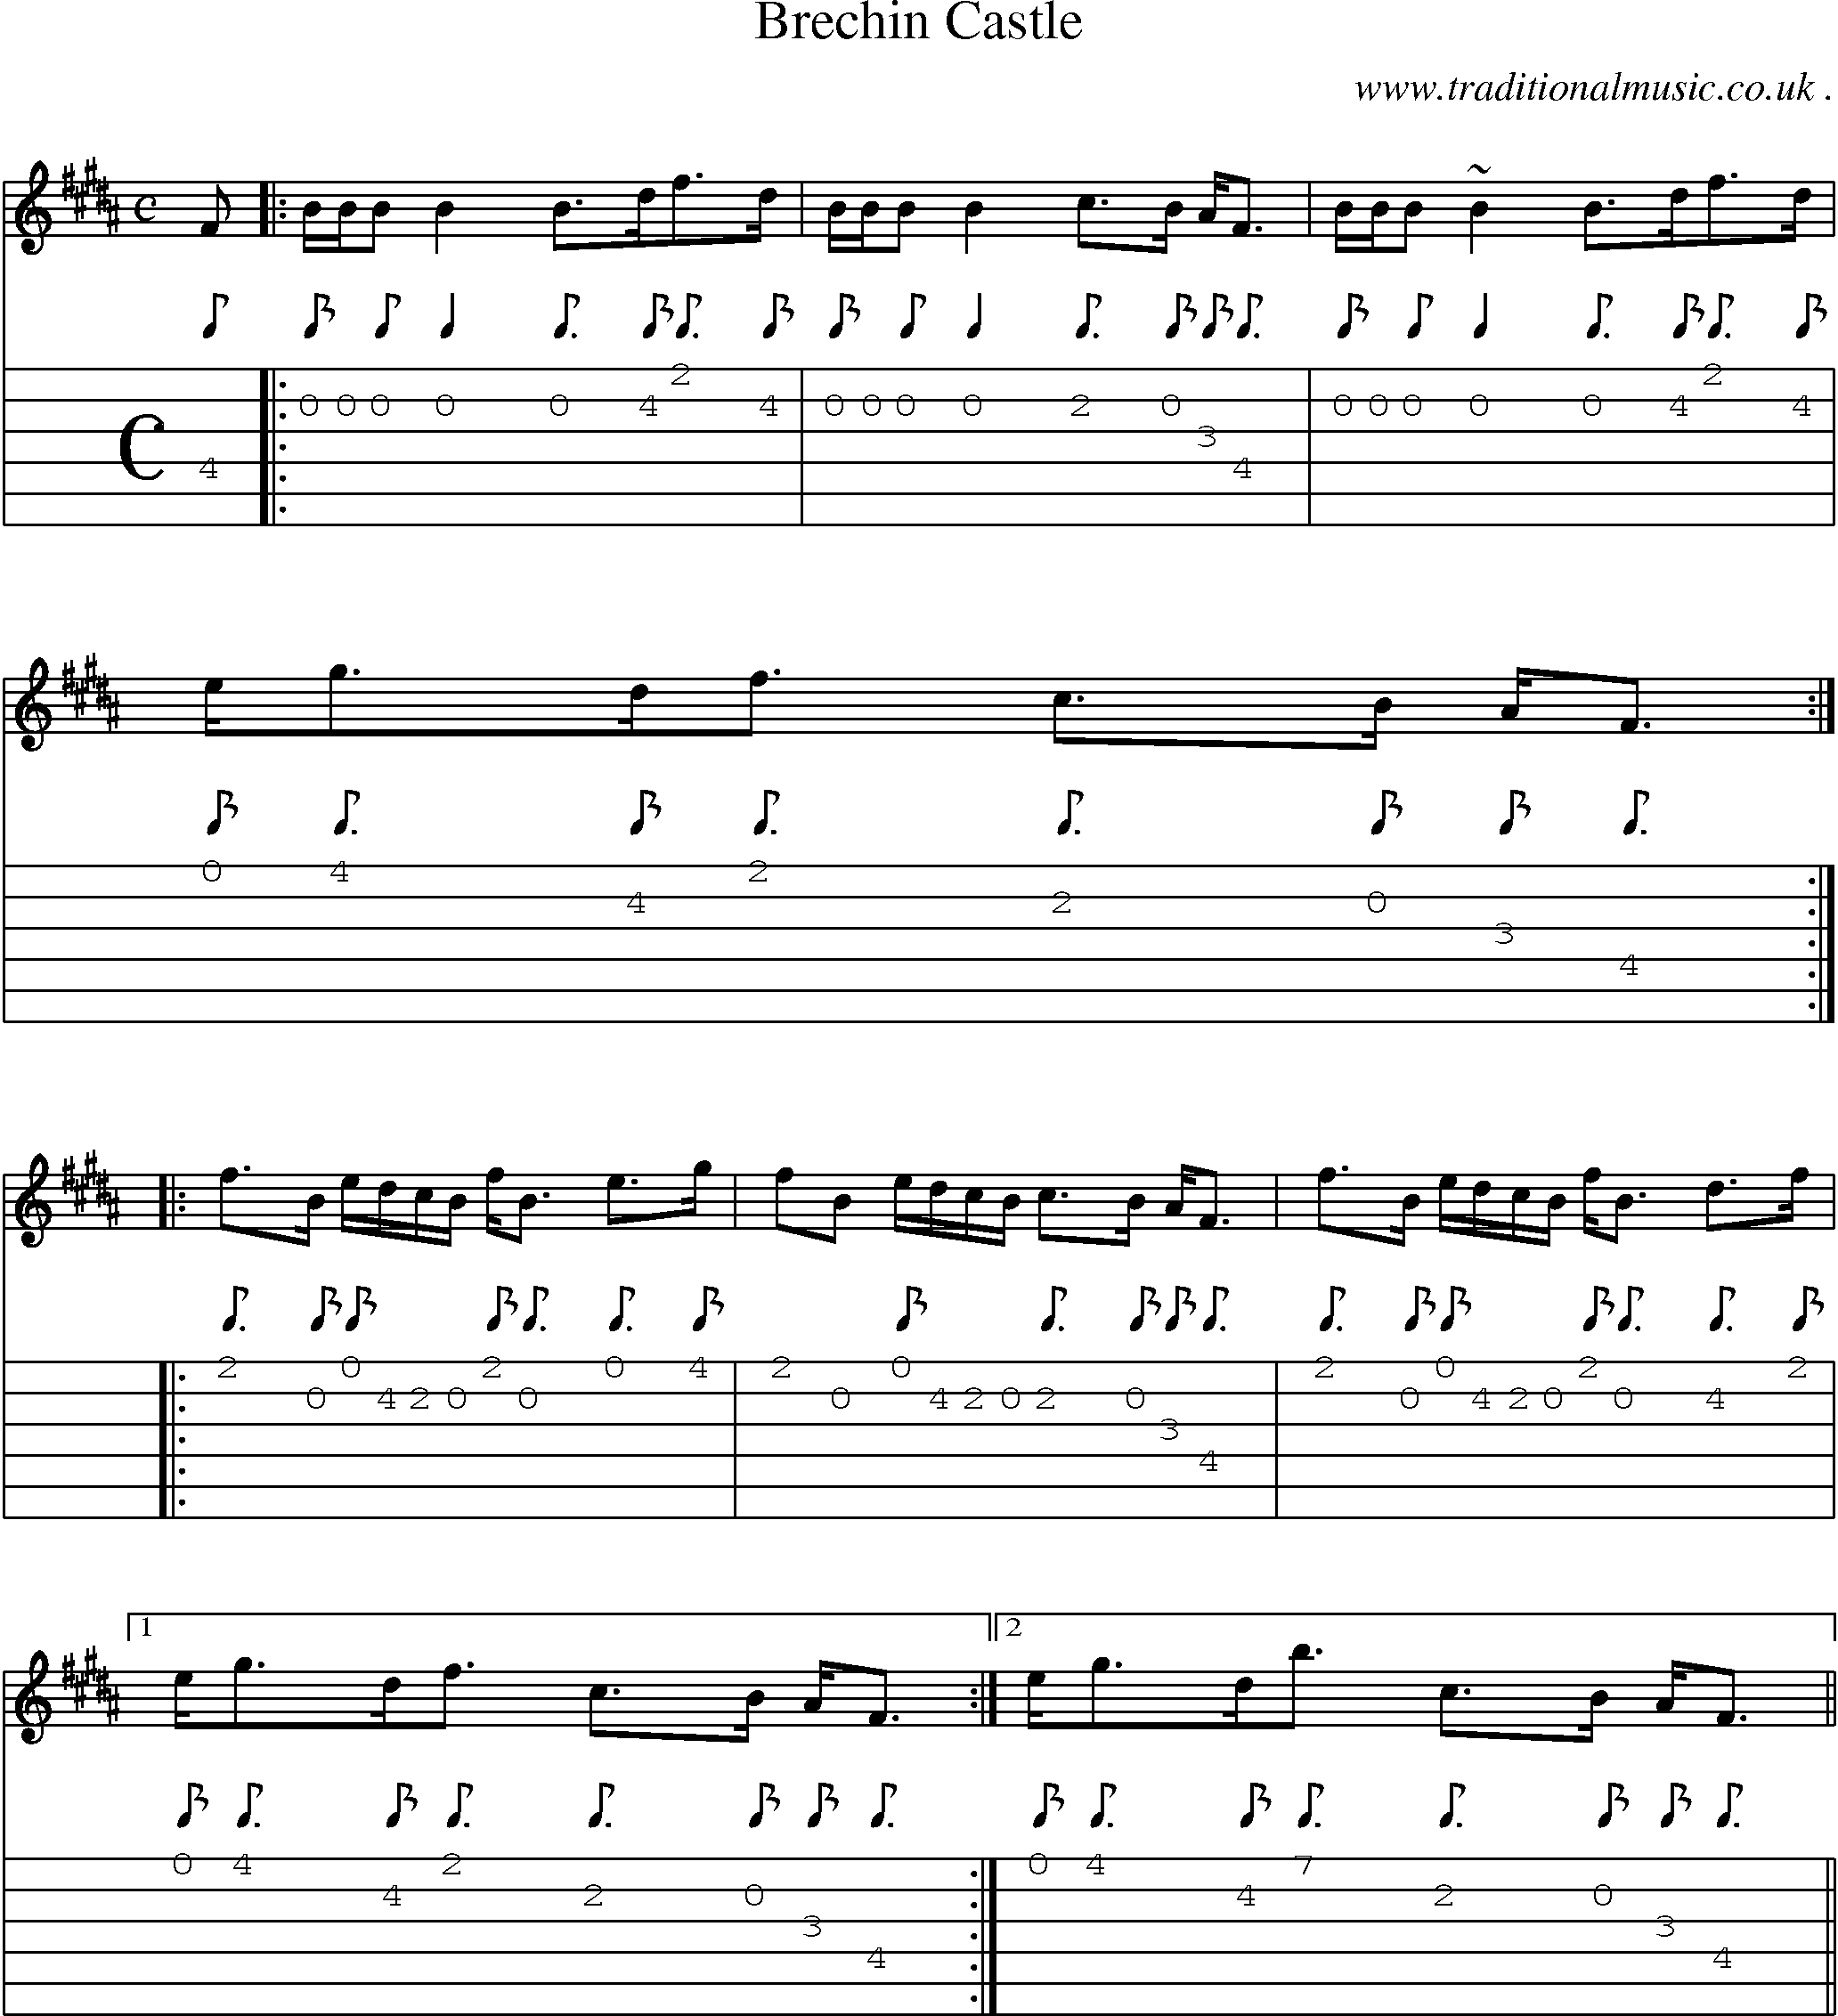 Sheet-music  score, Chords and Guitar Tabs for Brechin Castle